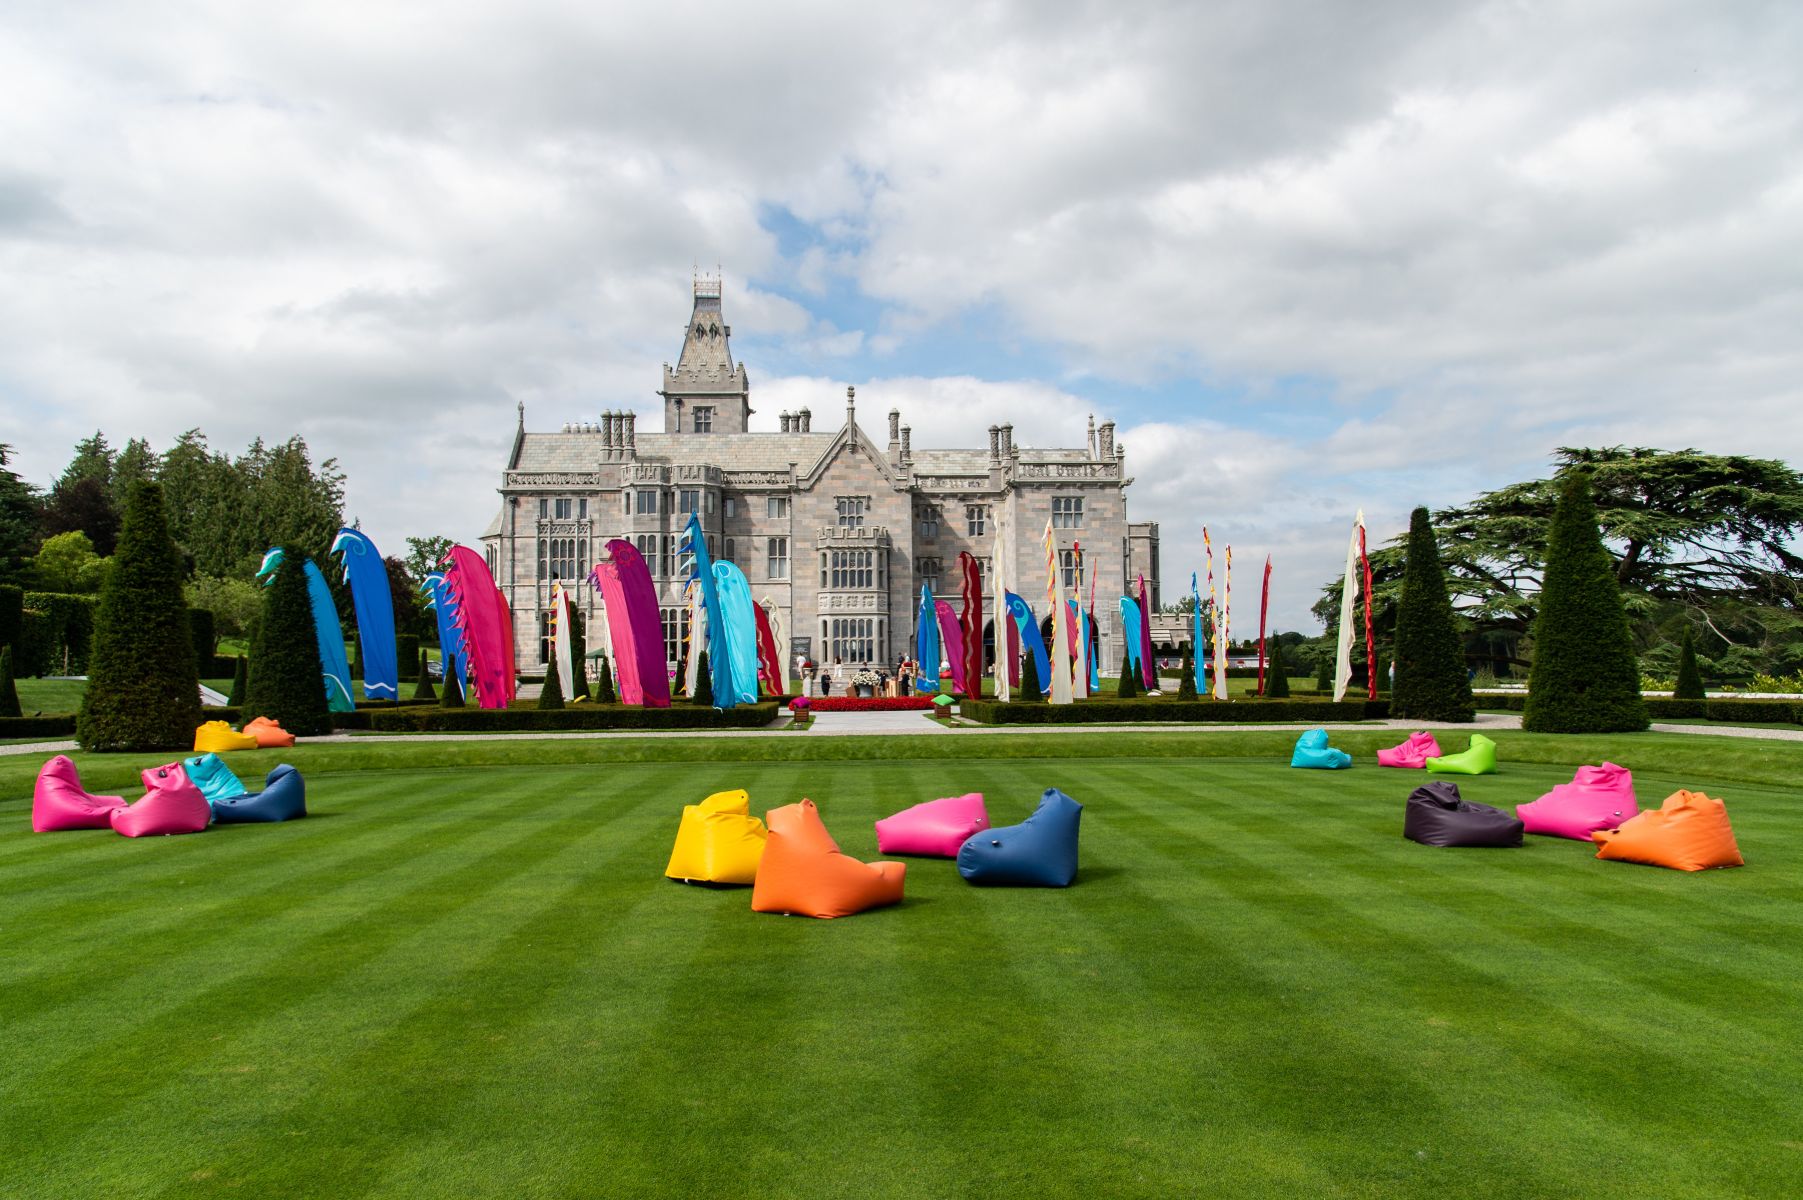 Adare Manor garden filled with colorful yard activities.